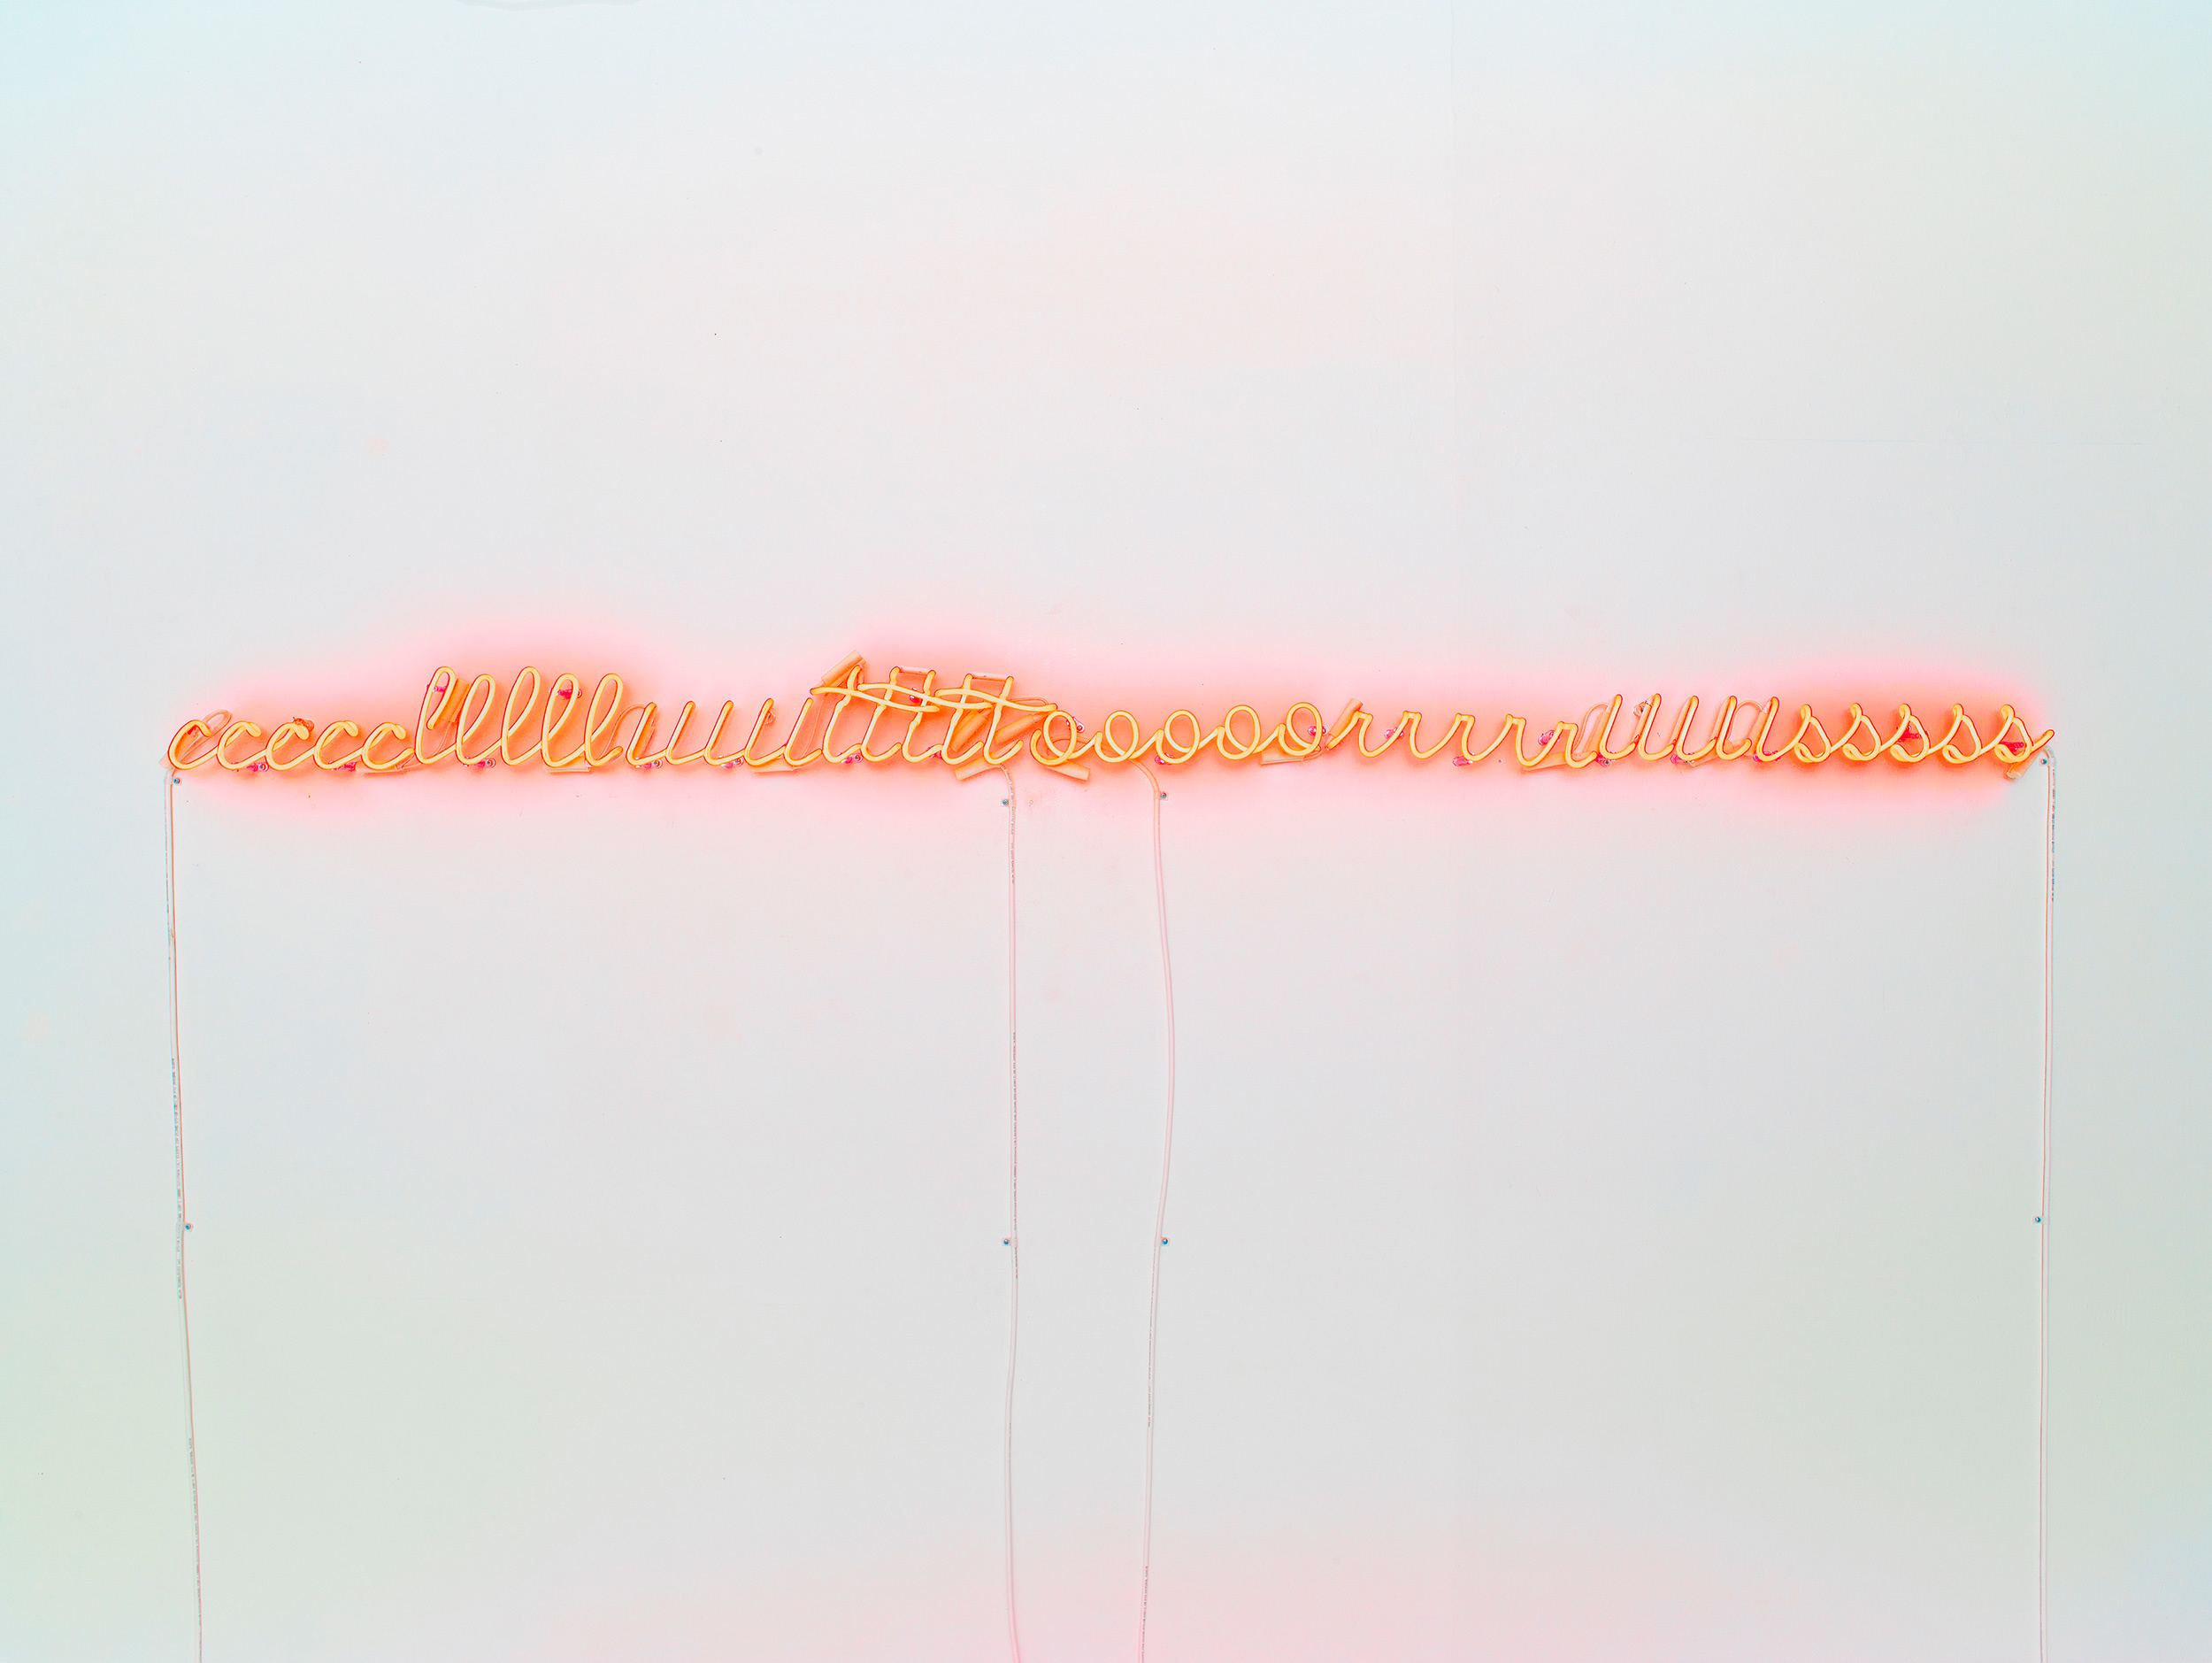  My Name On the Surface of a Lost Star, 2016 neon 4.5 x 95 x 2 in. (`11.5 x 241 x 5 cm)  